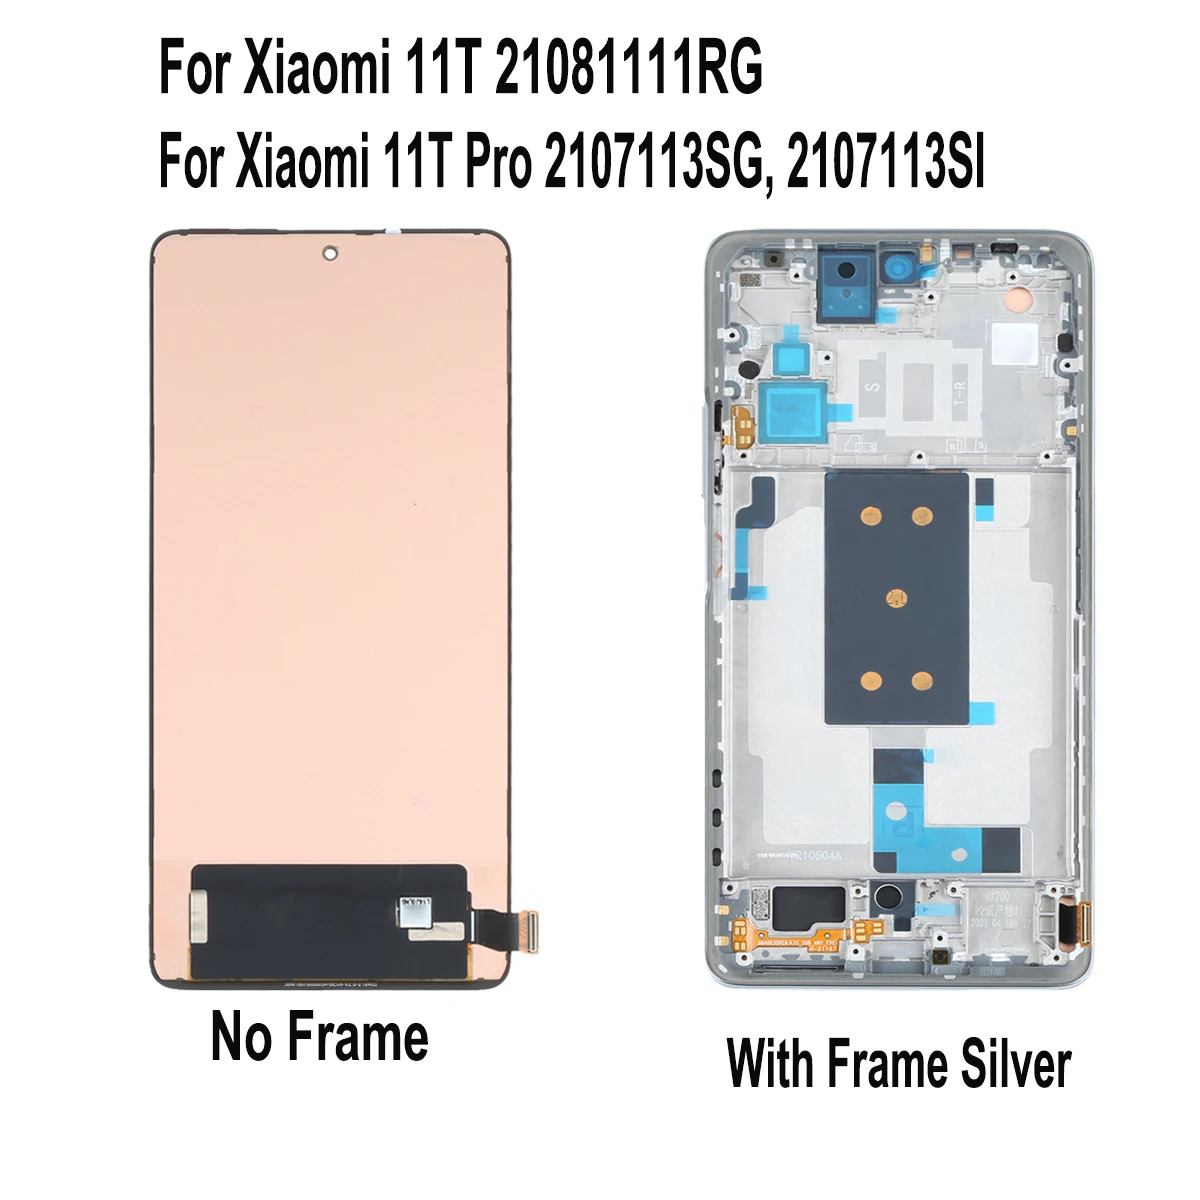 Original For Xiaomi 11T Pro 11TPro 2107113SG LCD Display Touch Screen Replacement Digitizer For Xiaomi 11T 11 T 21081111RG LCD enlarge